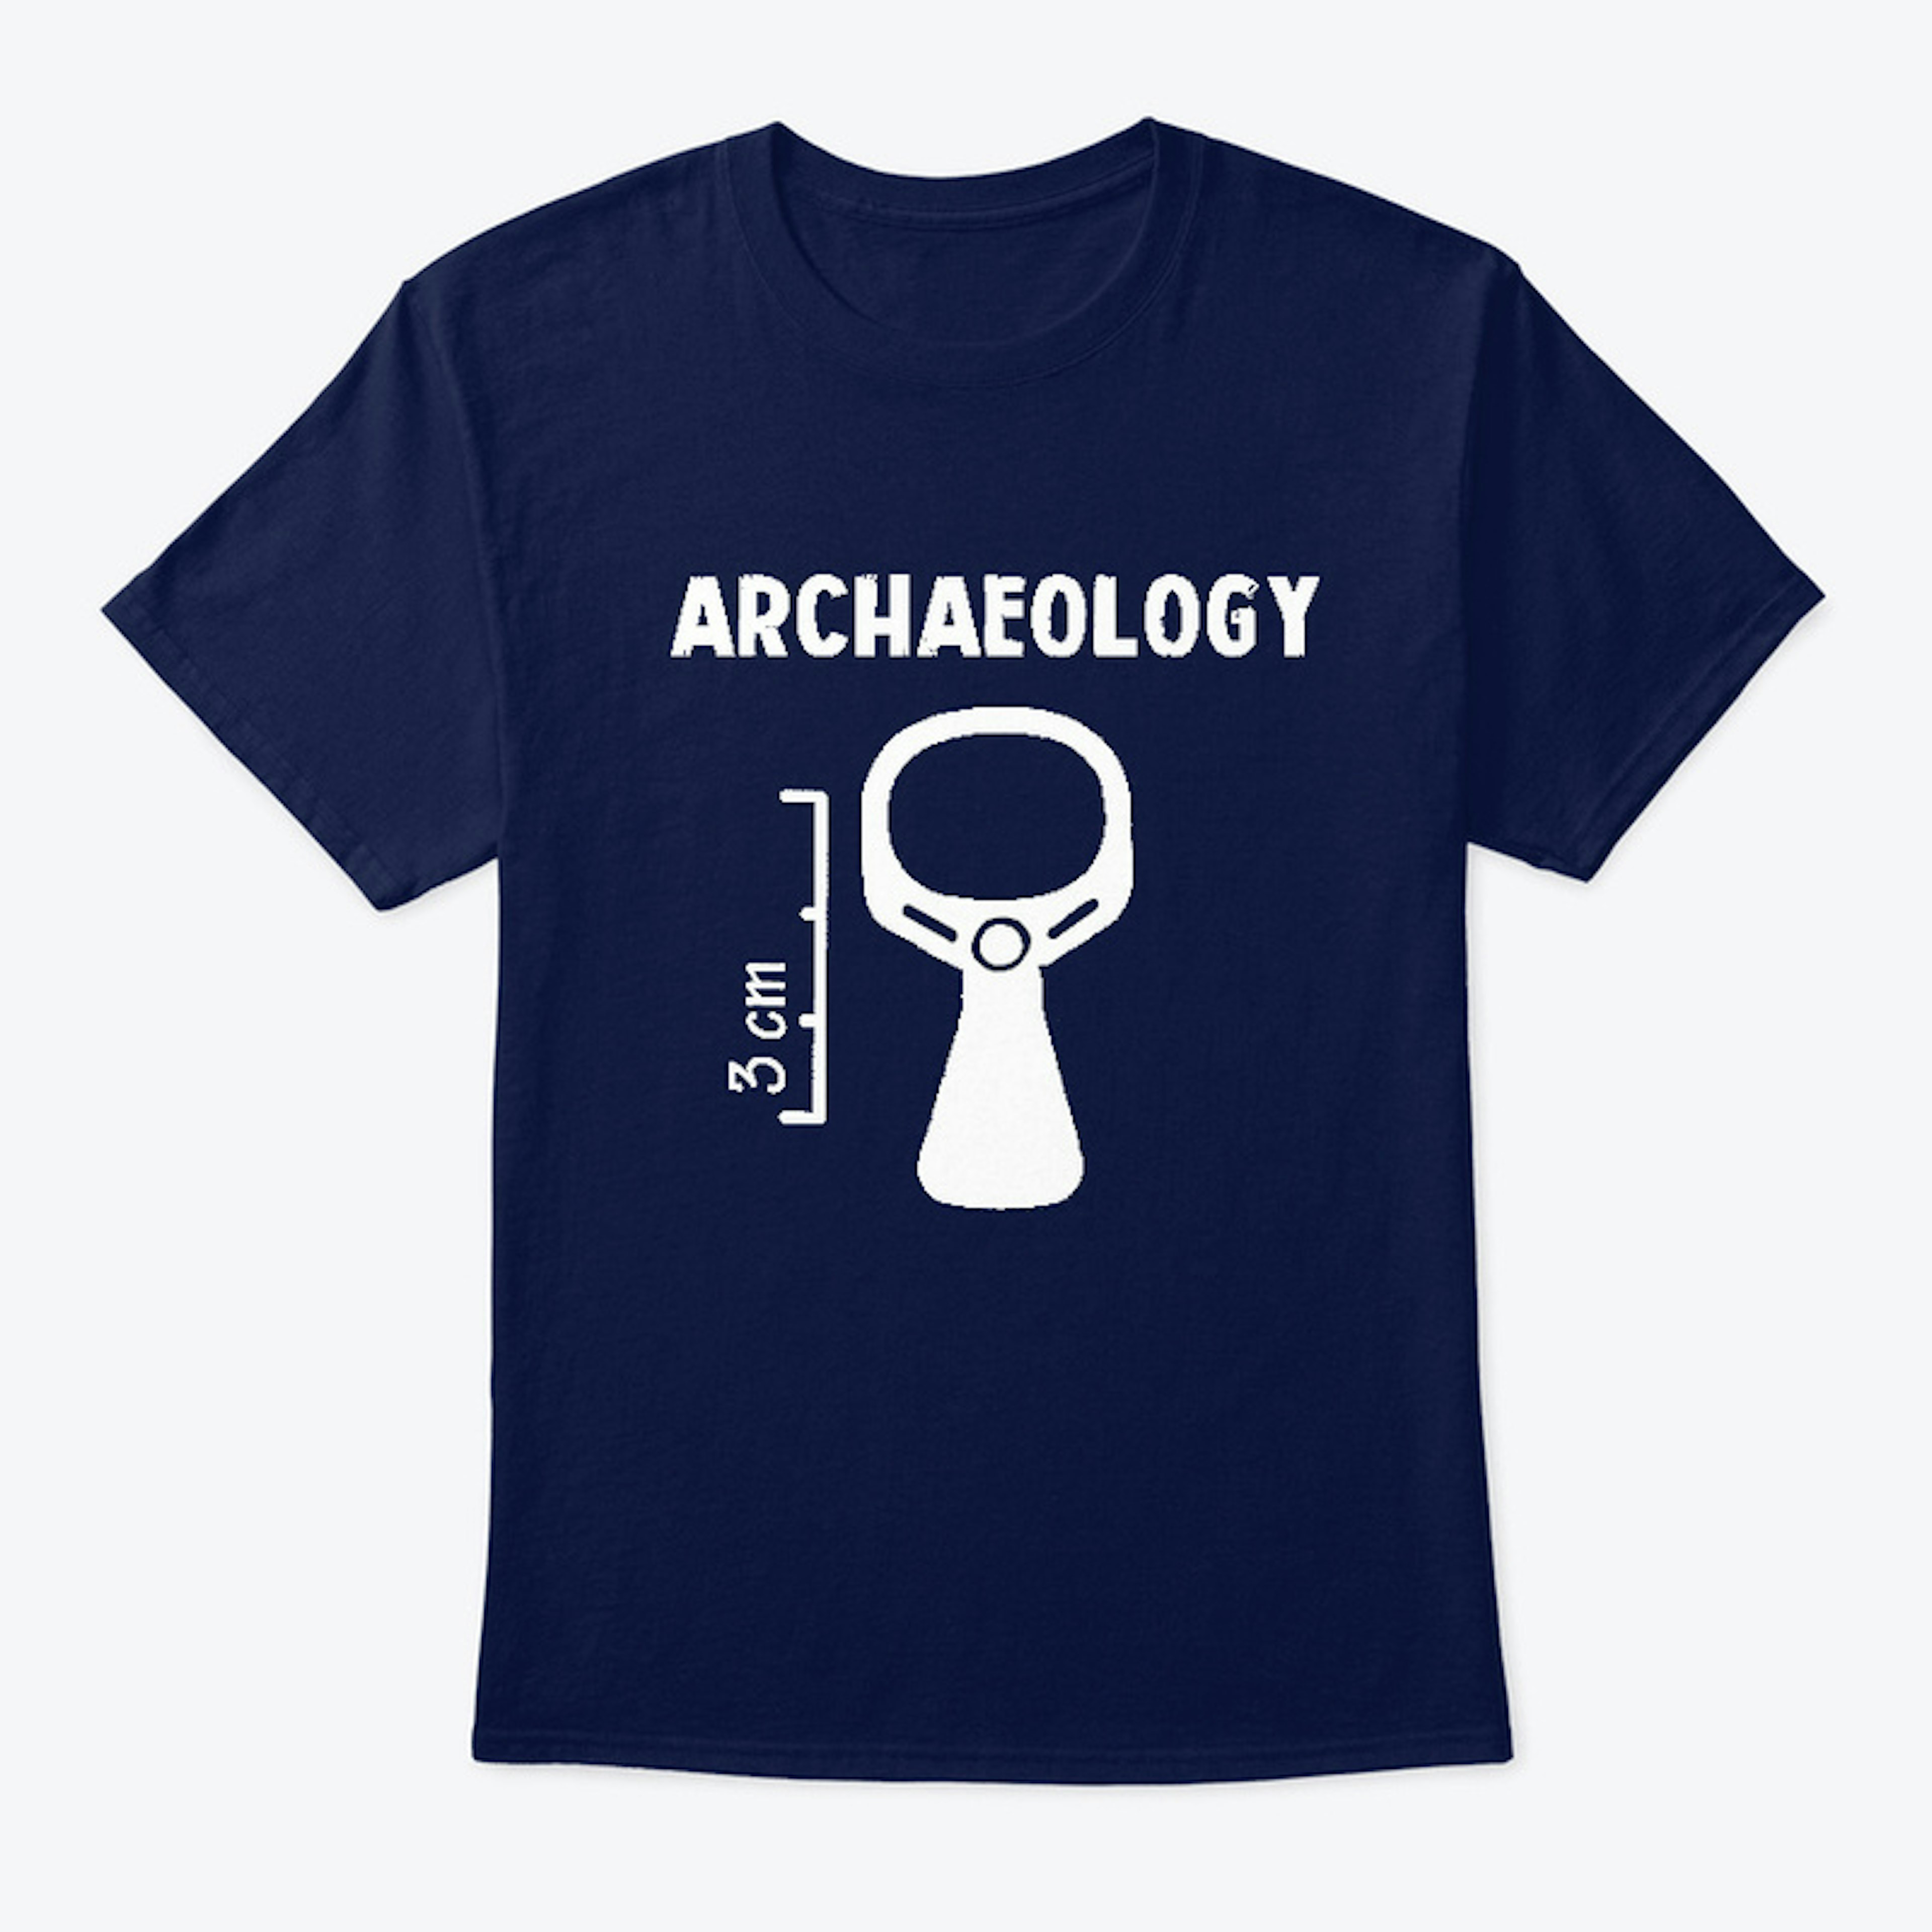 Pull Tab Archaeology Fanware